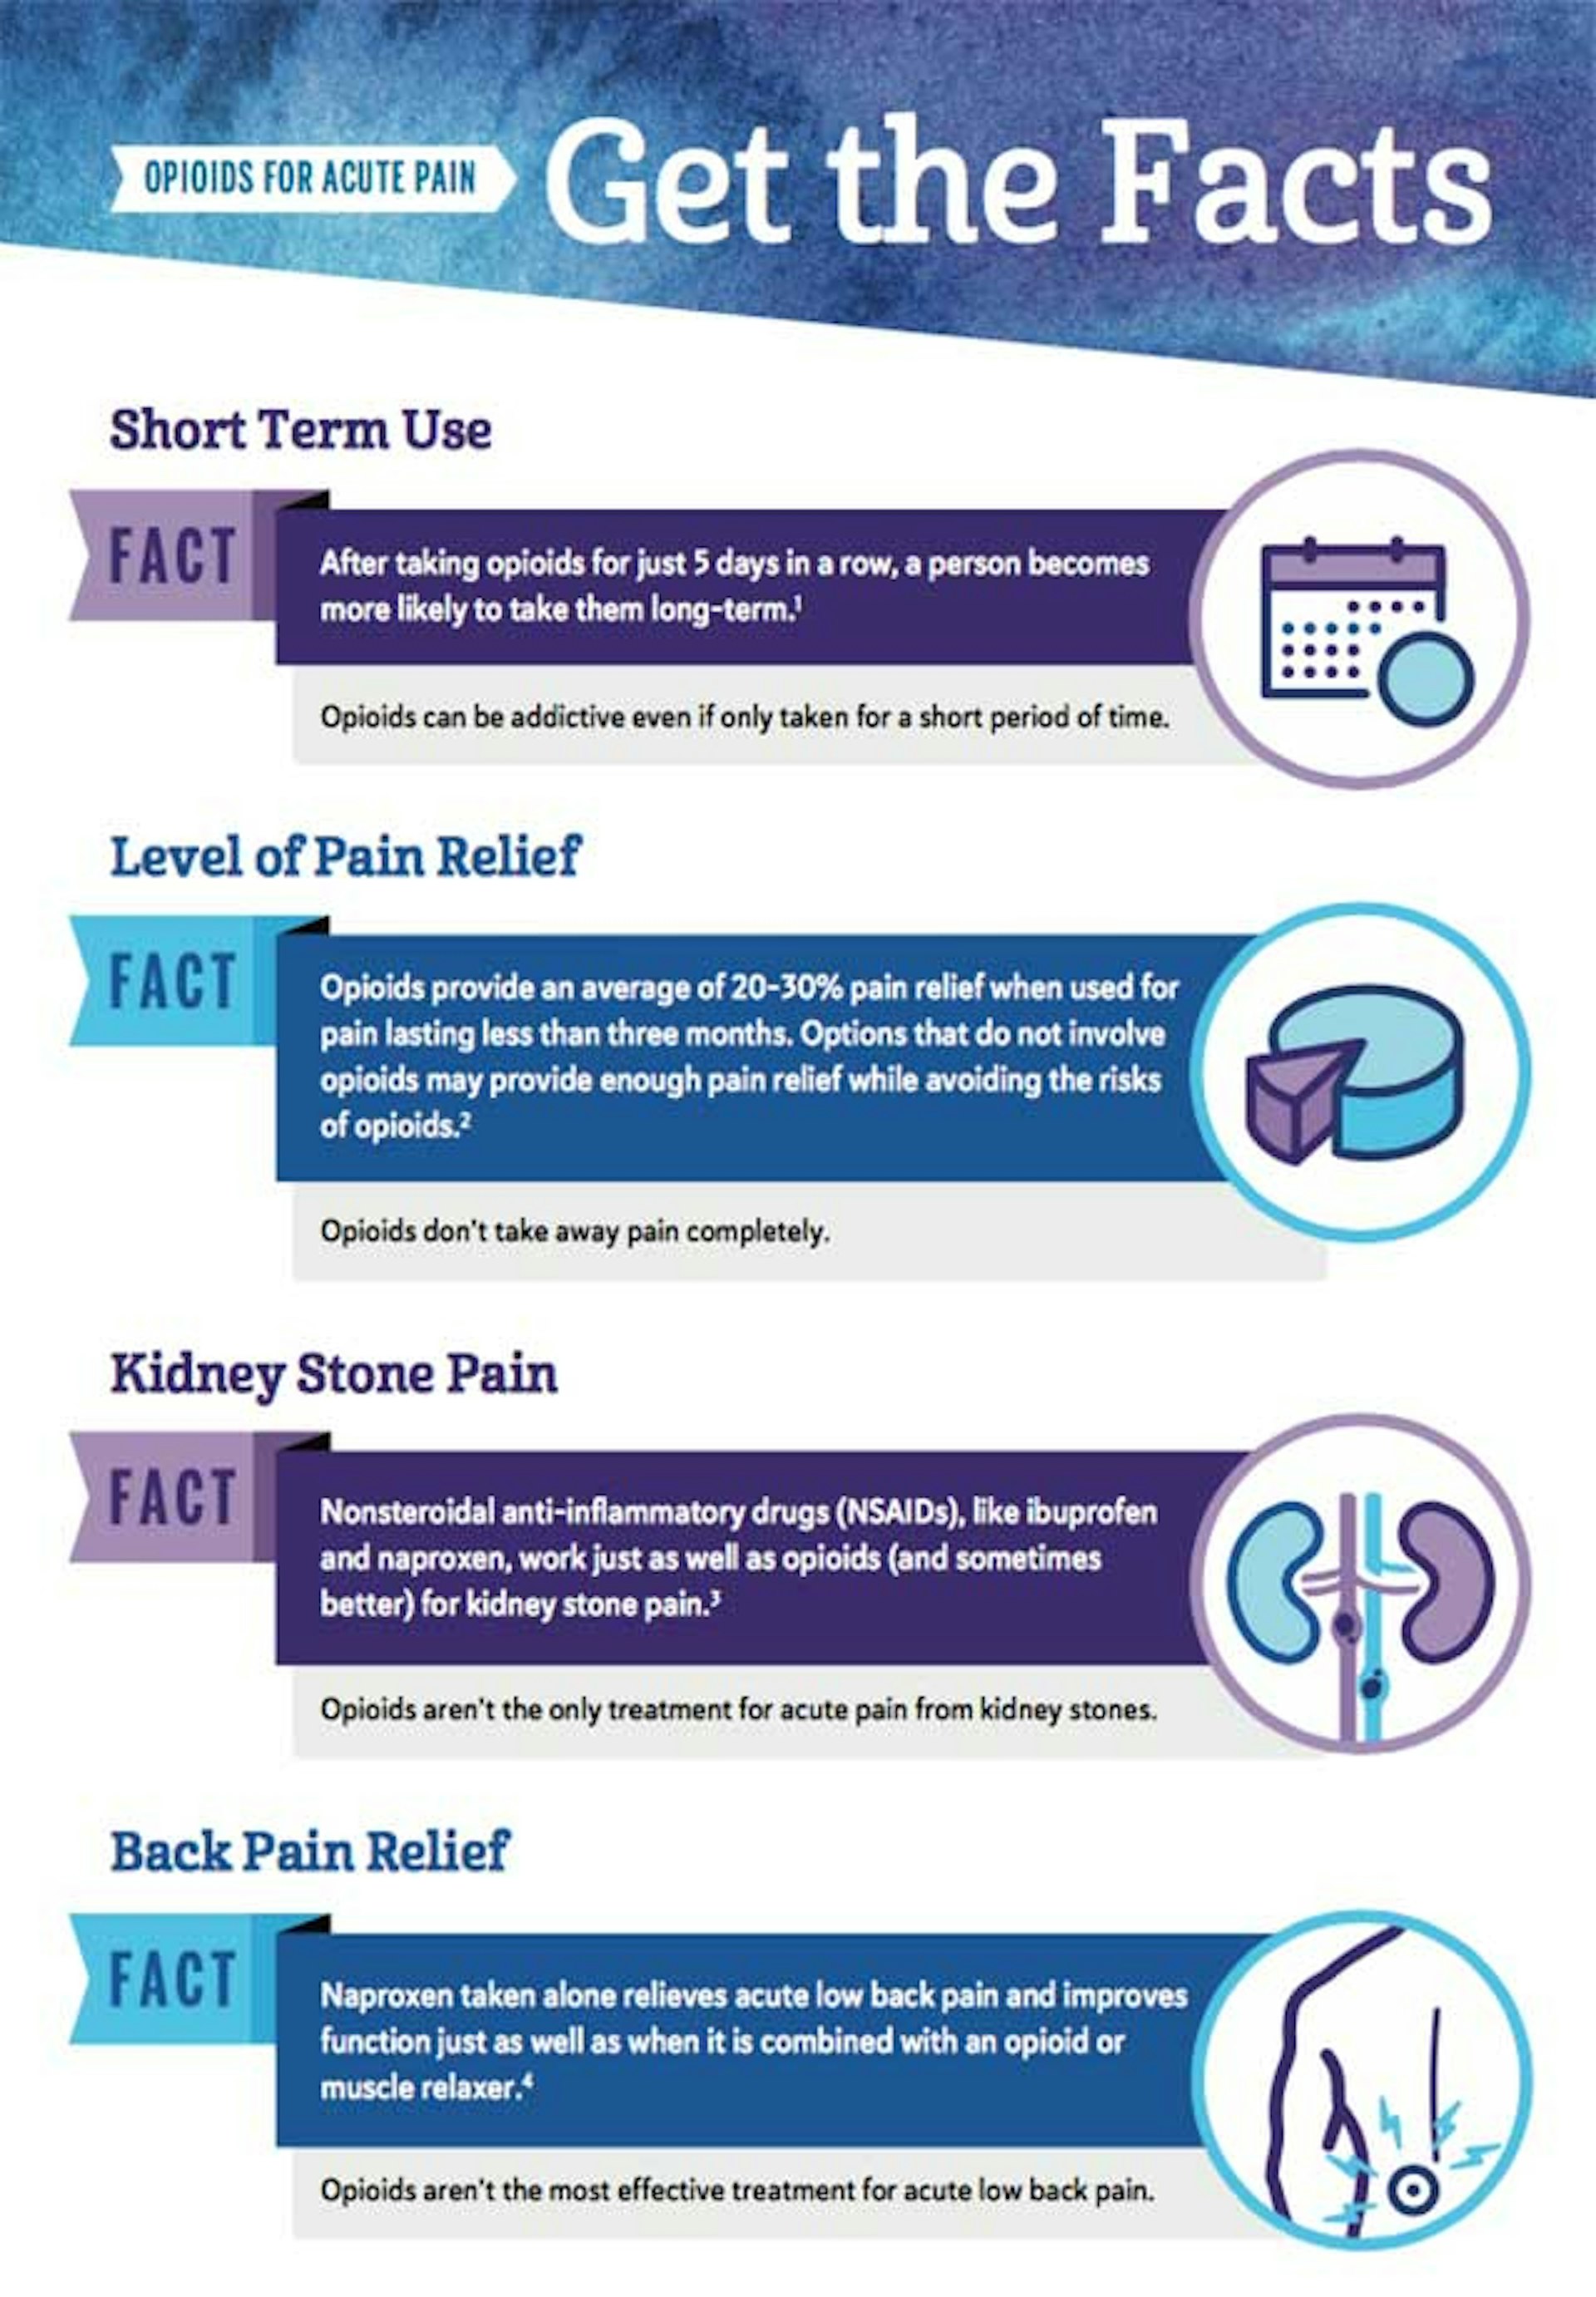 Opioids for Acute Pain — Get the Facts